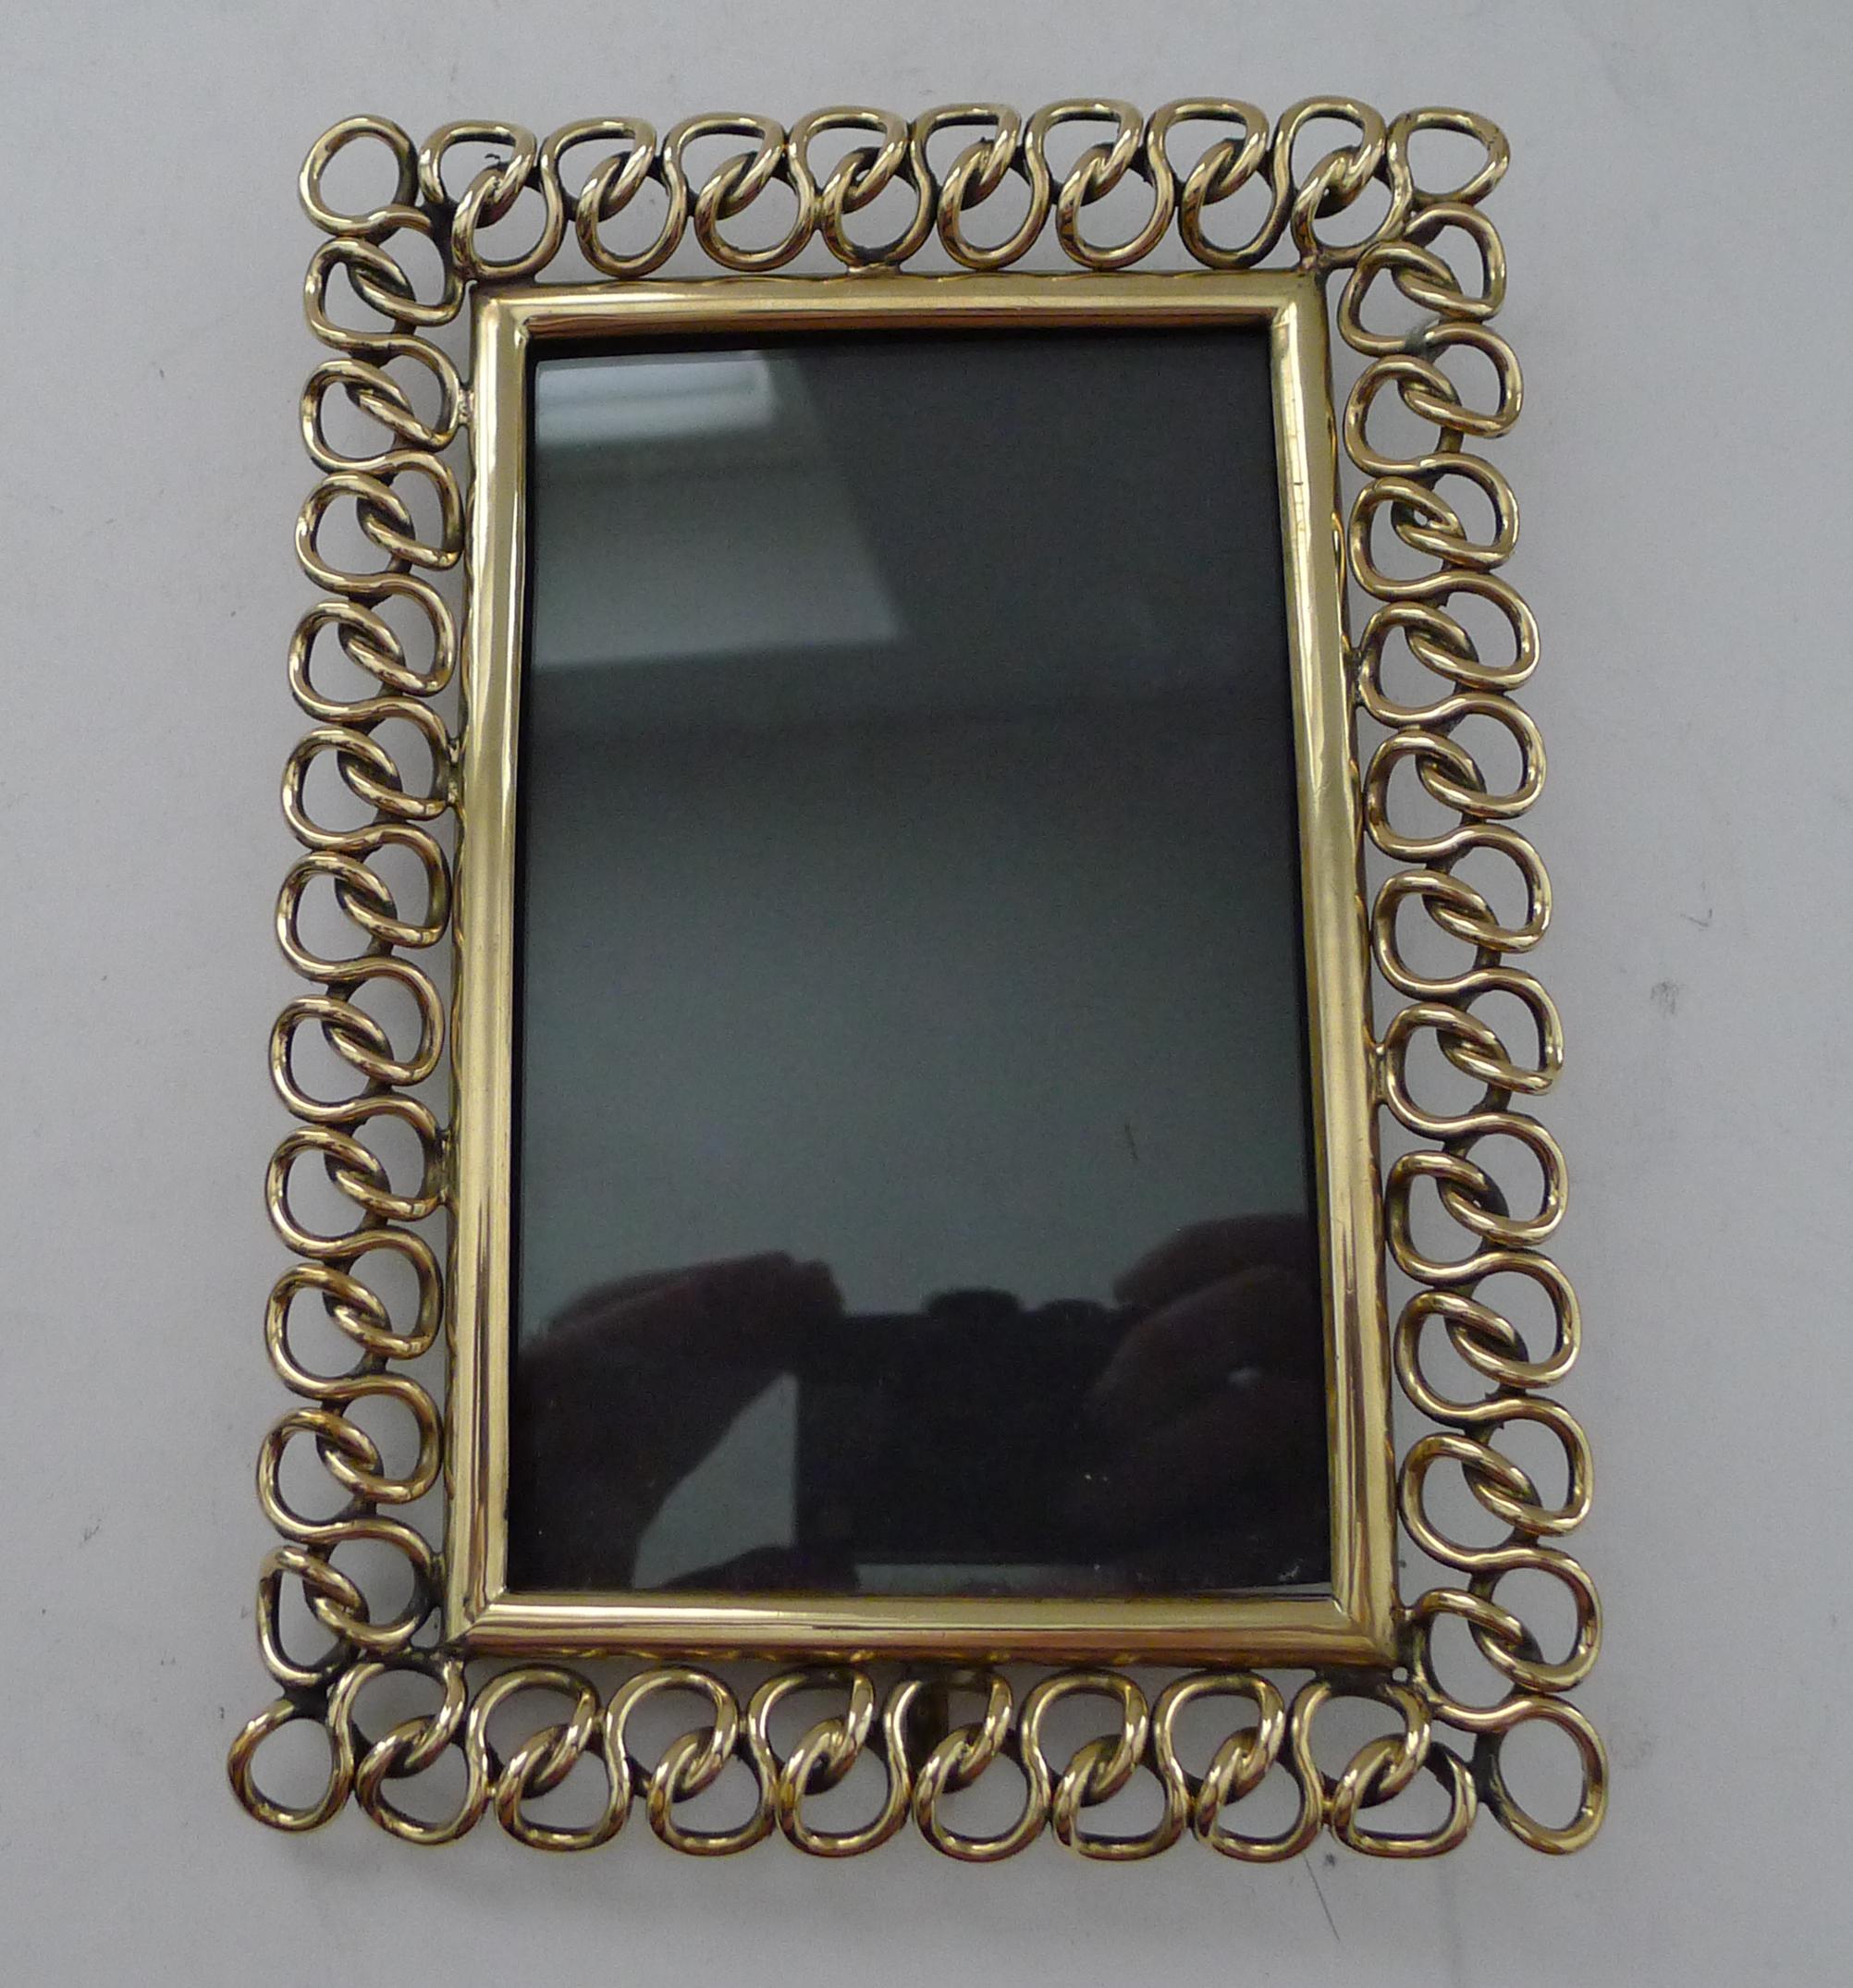 Late 19th Century Stunning Antique English Brass Ring Picture Frame c.1890